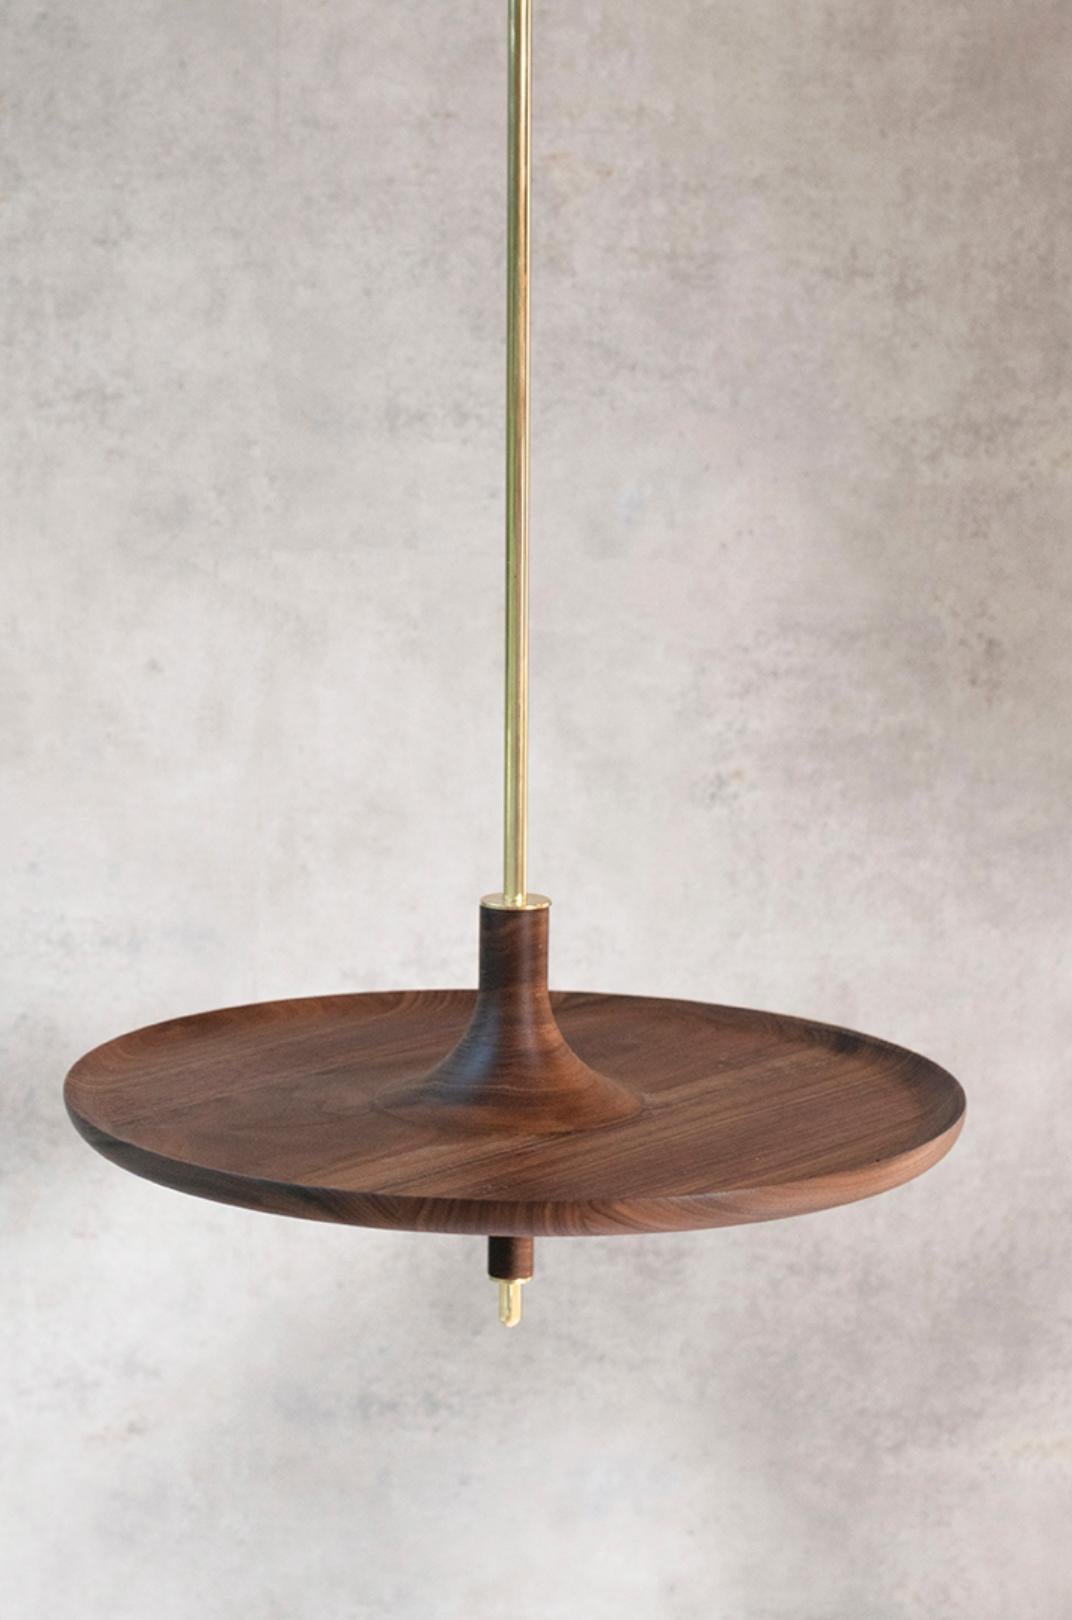 Toupy Walnut And Brass 38 Hanging Table by Mademoiselle Jo
Dimensions: Ø 38 x H 150 cm.
Materials: Walnut wood and brass.

Available in four colors, two bar versions and several diameters. Please contact us. 

Taking the shape of a wooden spinning